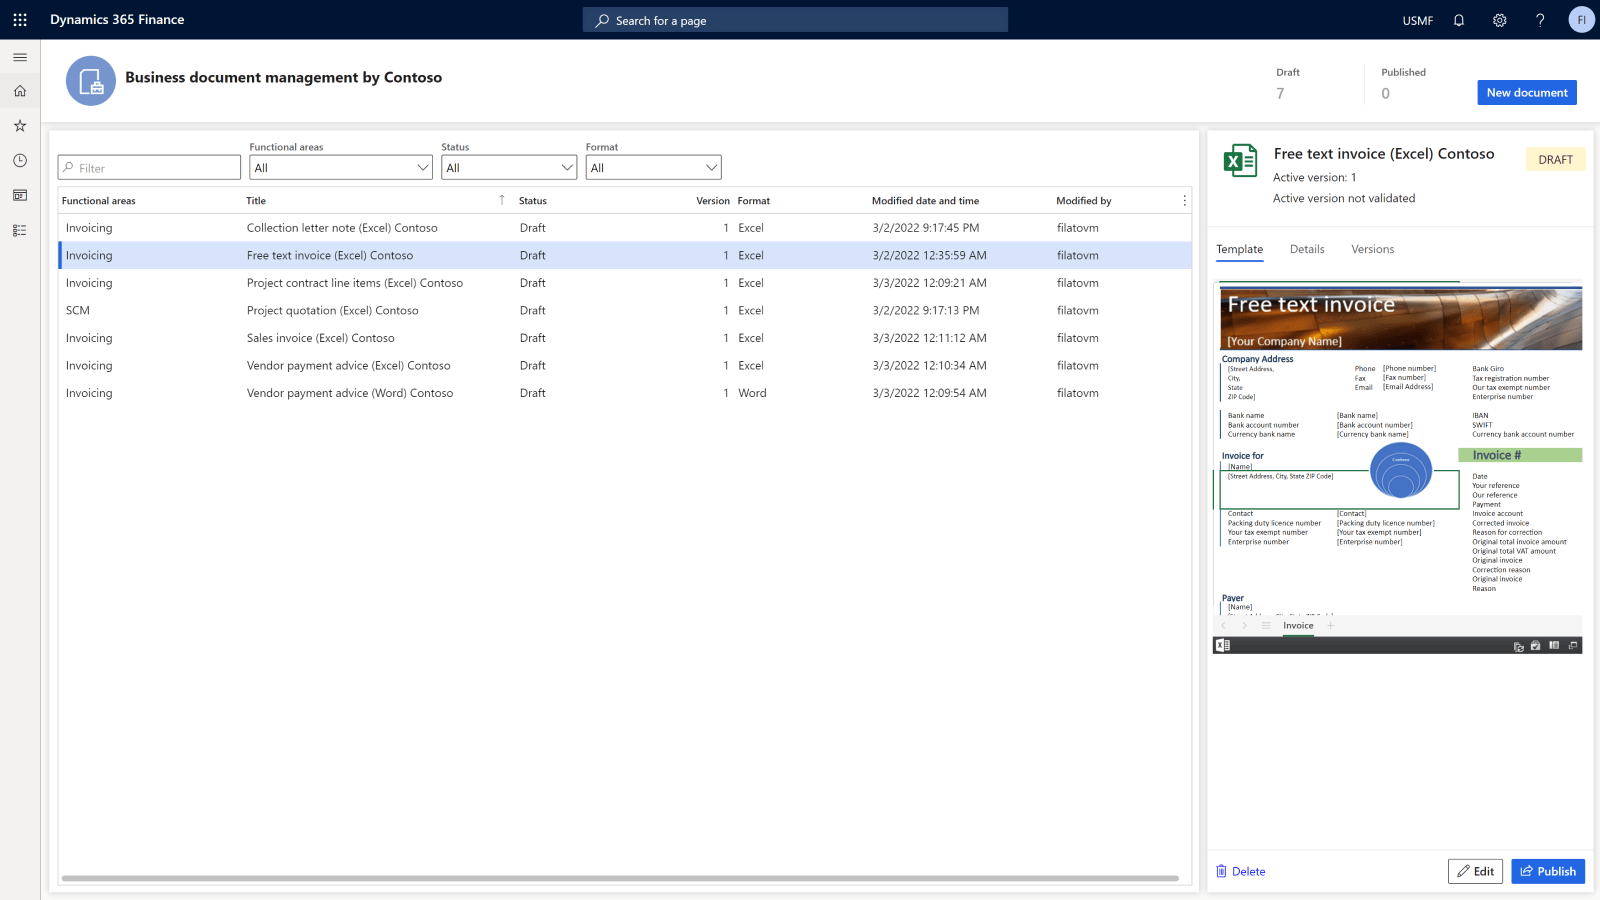 Image of business document management by contoso dashboard